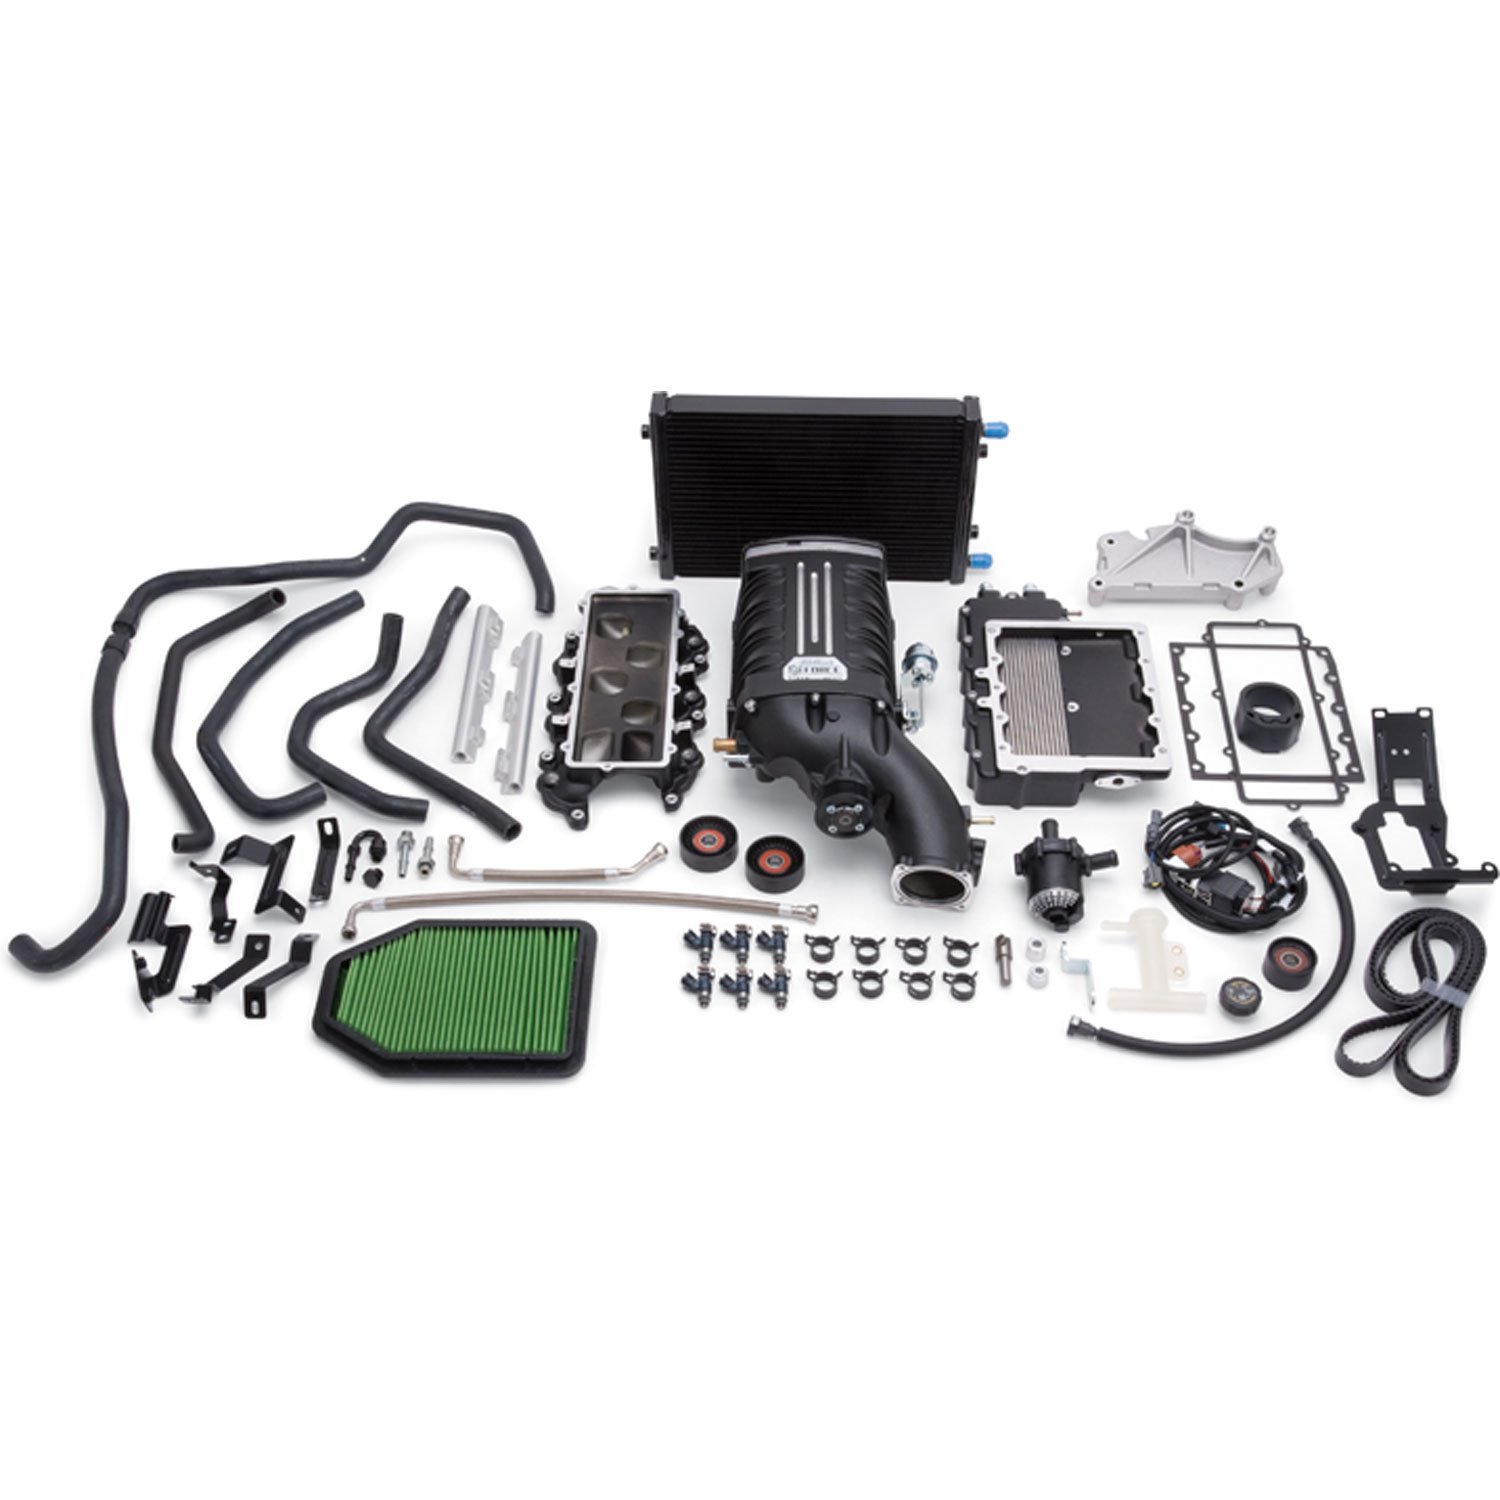 Stage-1 Street Supercharger System for 2012-2014 Jeep Wrangler JK 3.6L Engine w/o Tune